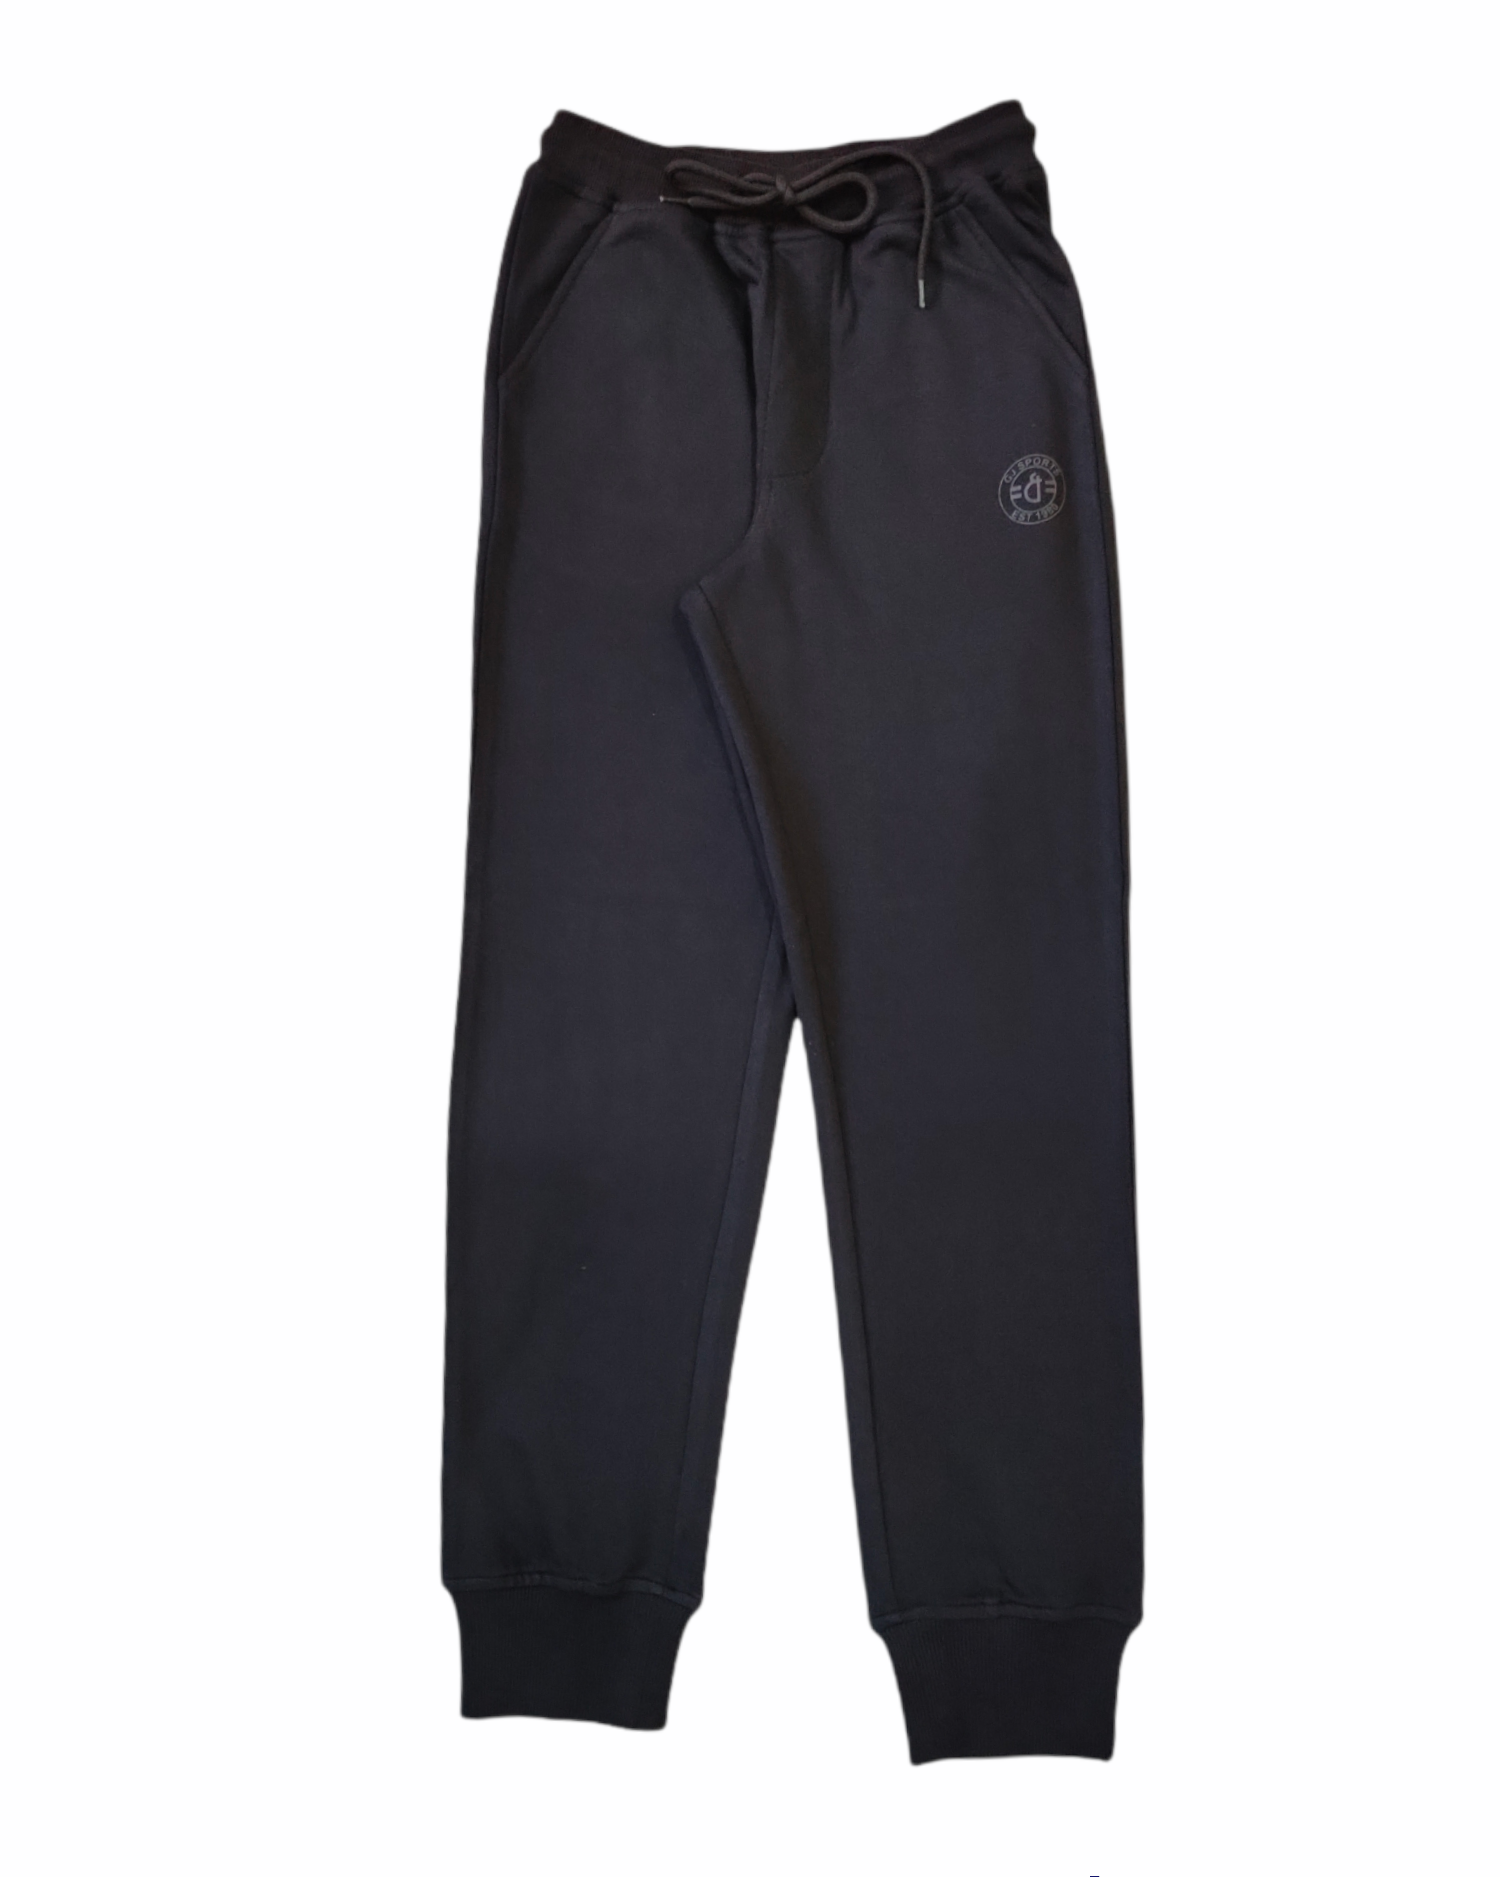 Boys Black Solid Knits Track Pant Elasticated